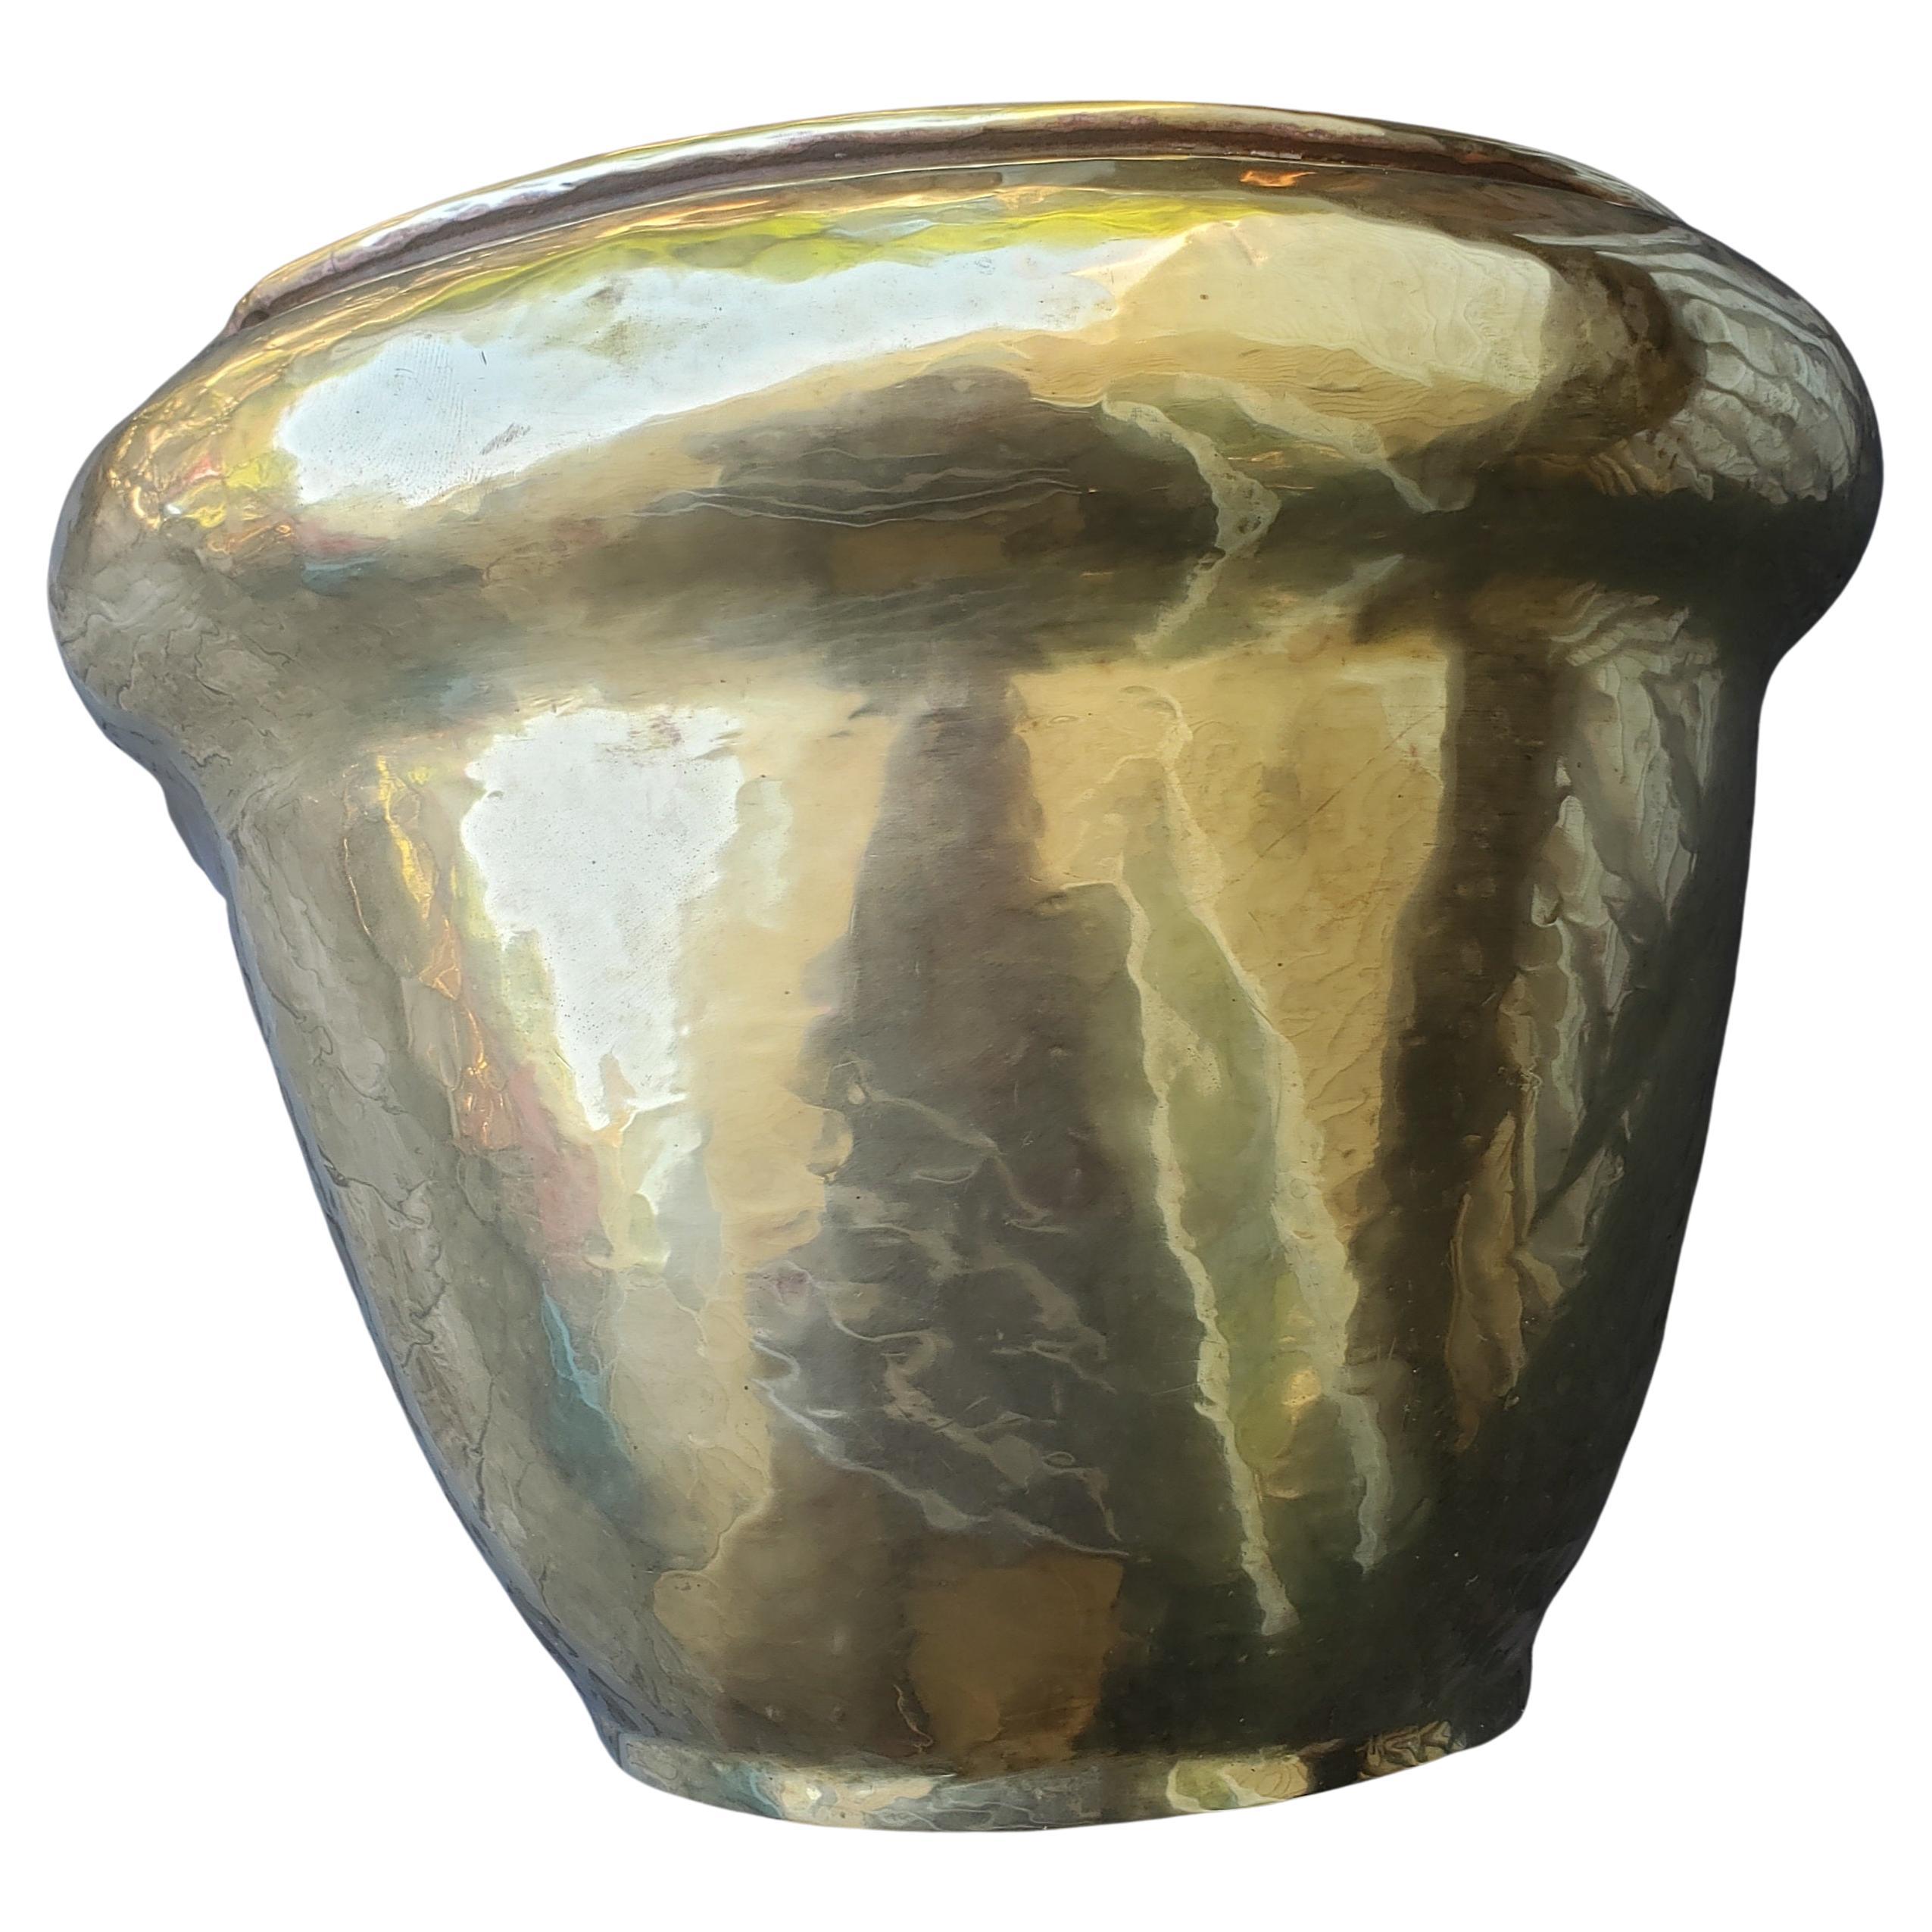 Early 20th century polished brass planter jardiniere.
Measures 9.75